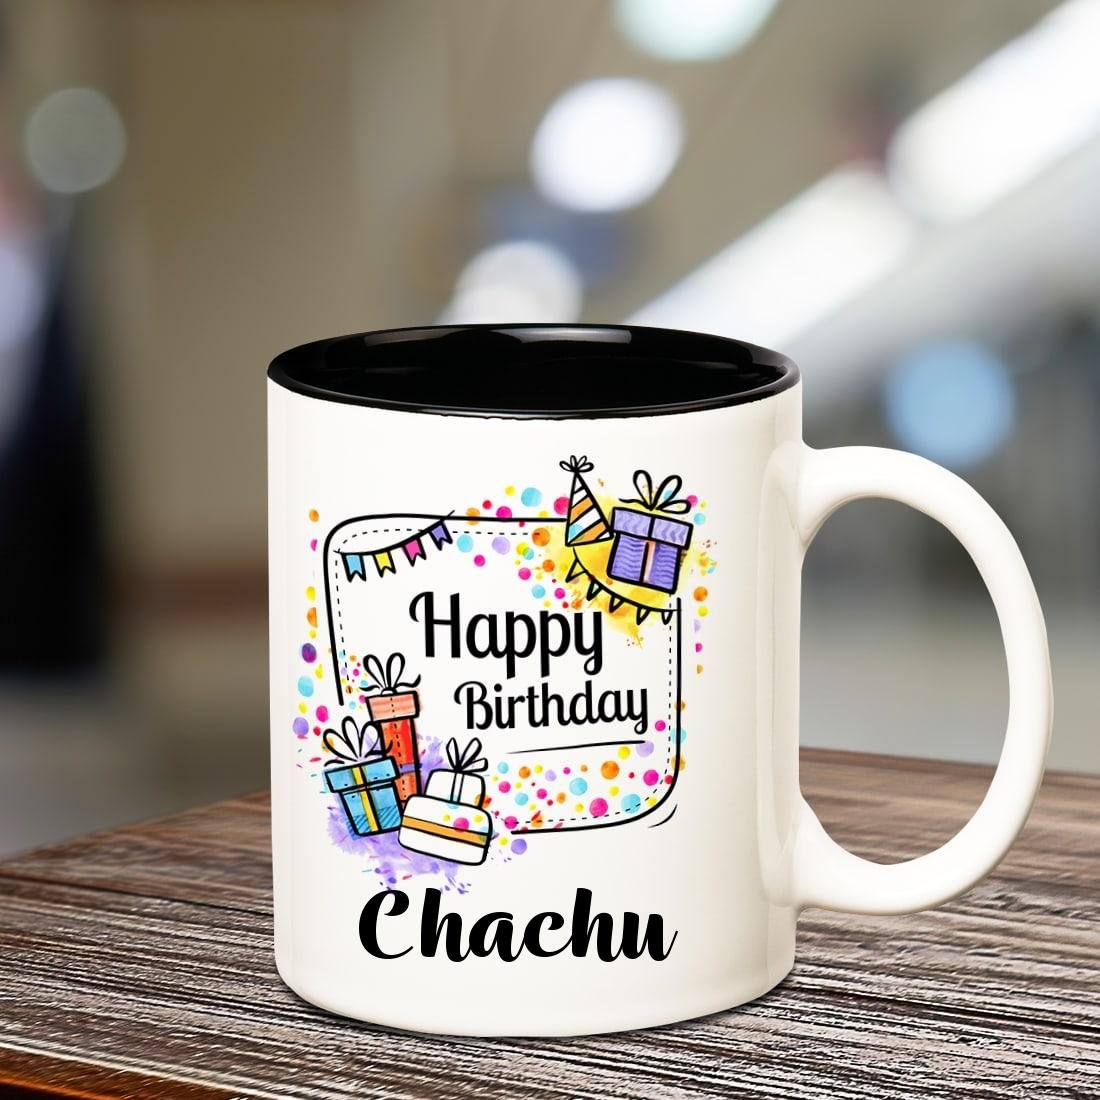 Happy Birthday Chachu Wishes Images 